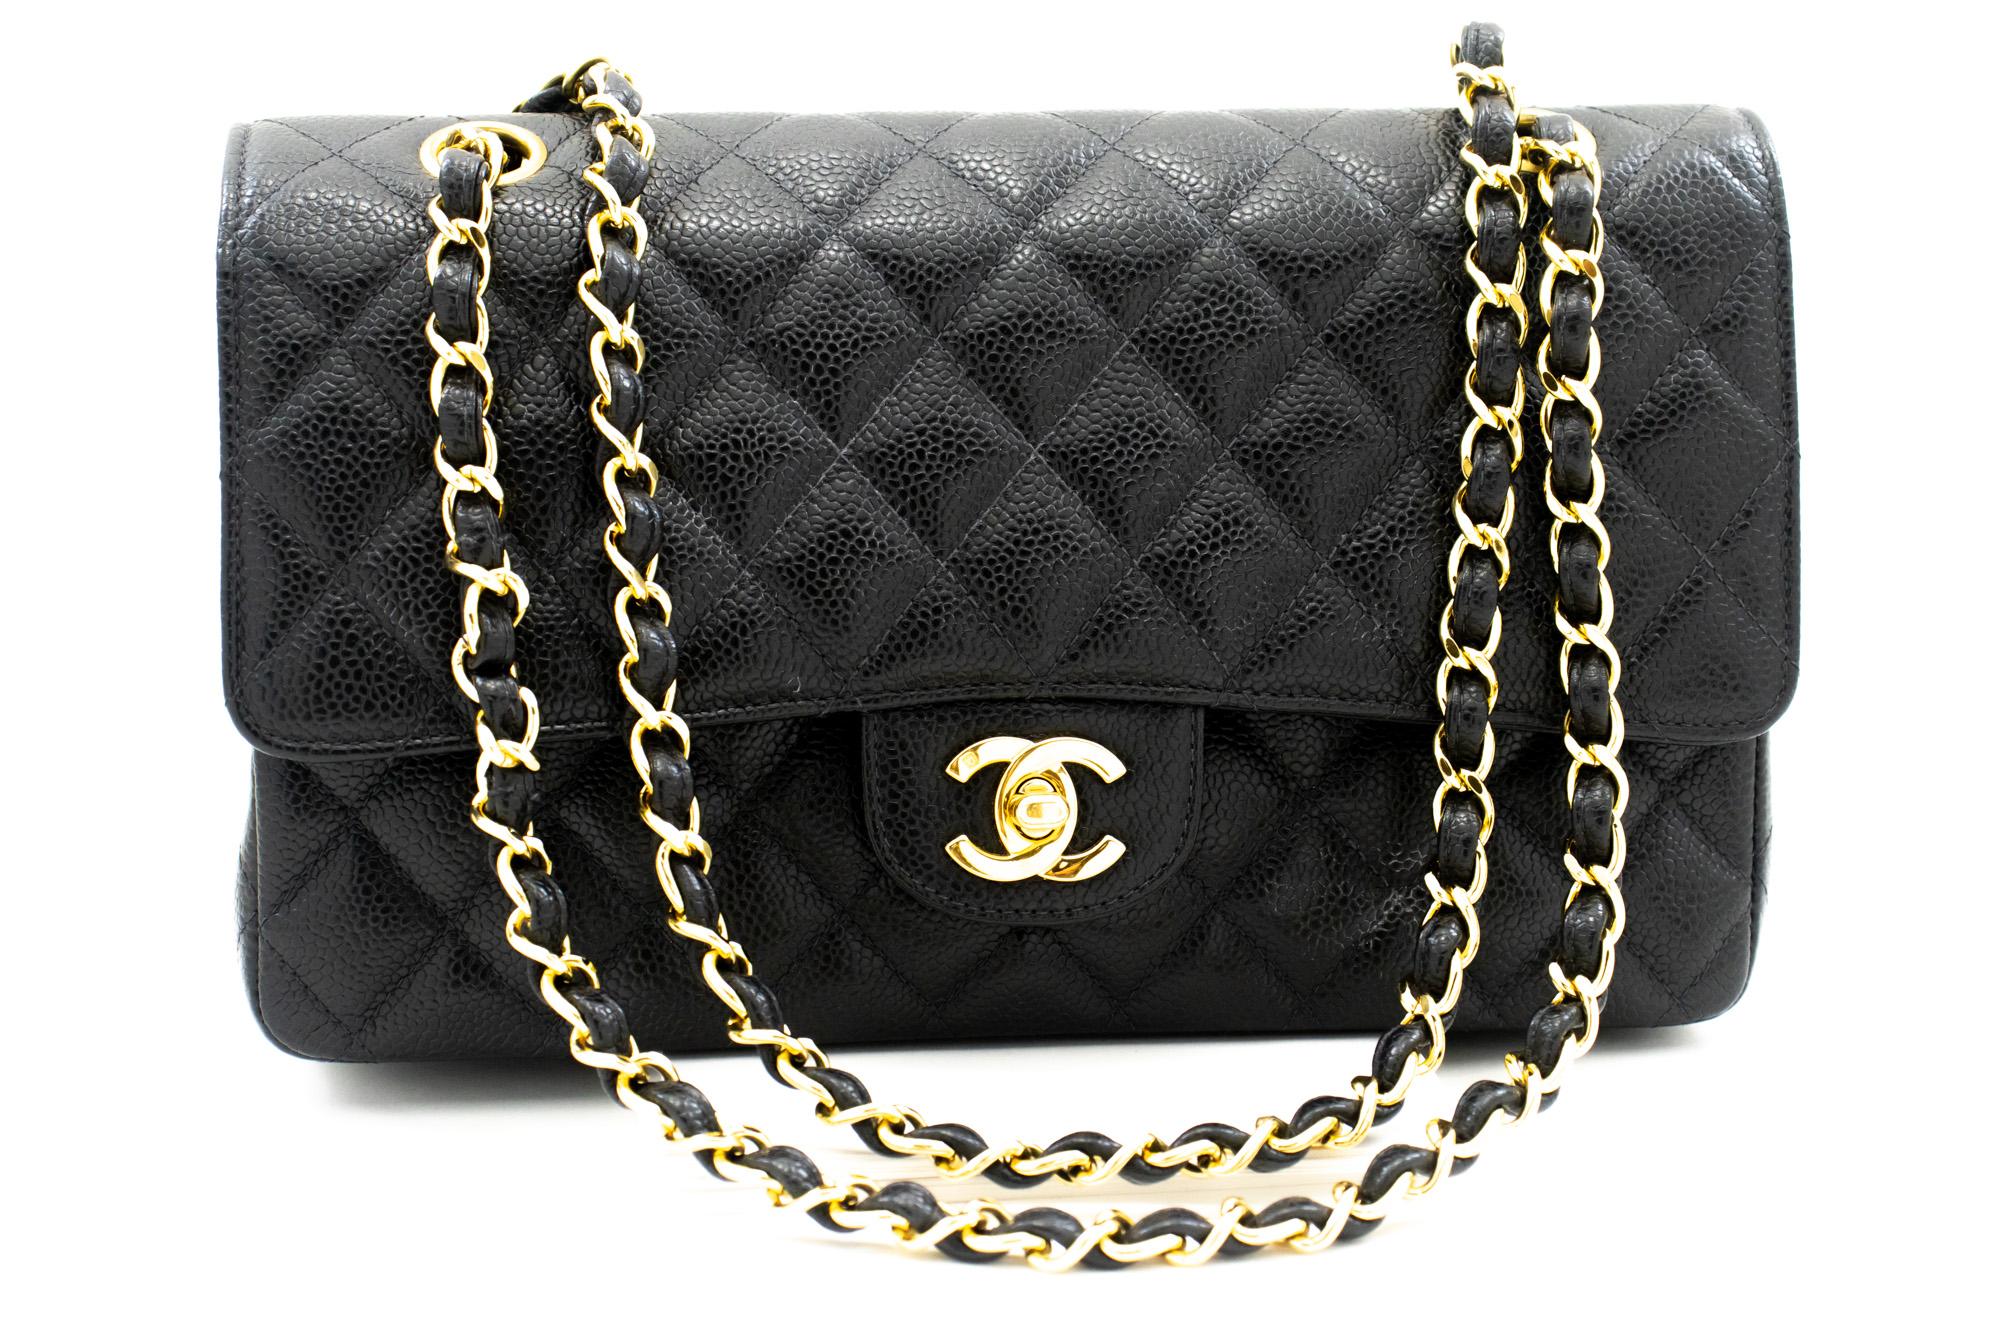 An authentic CHANEL Classic Double Flap Medium Chain Shoulder Bag Black Quilted. The color is Black. The outside material is Leather. The pattern is Solid. This item is Vintage / Classic. The year of manufacture would be 1997-1999.
Conditions &